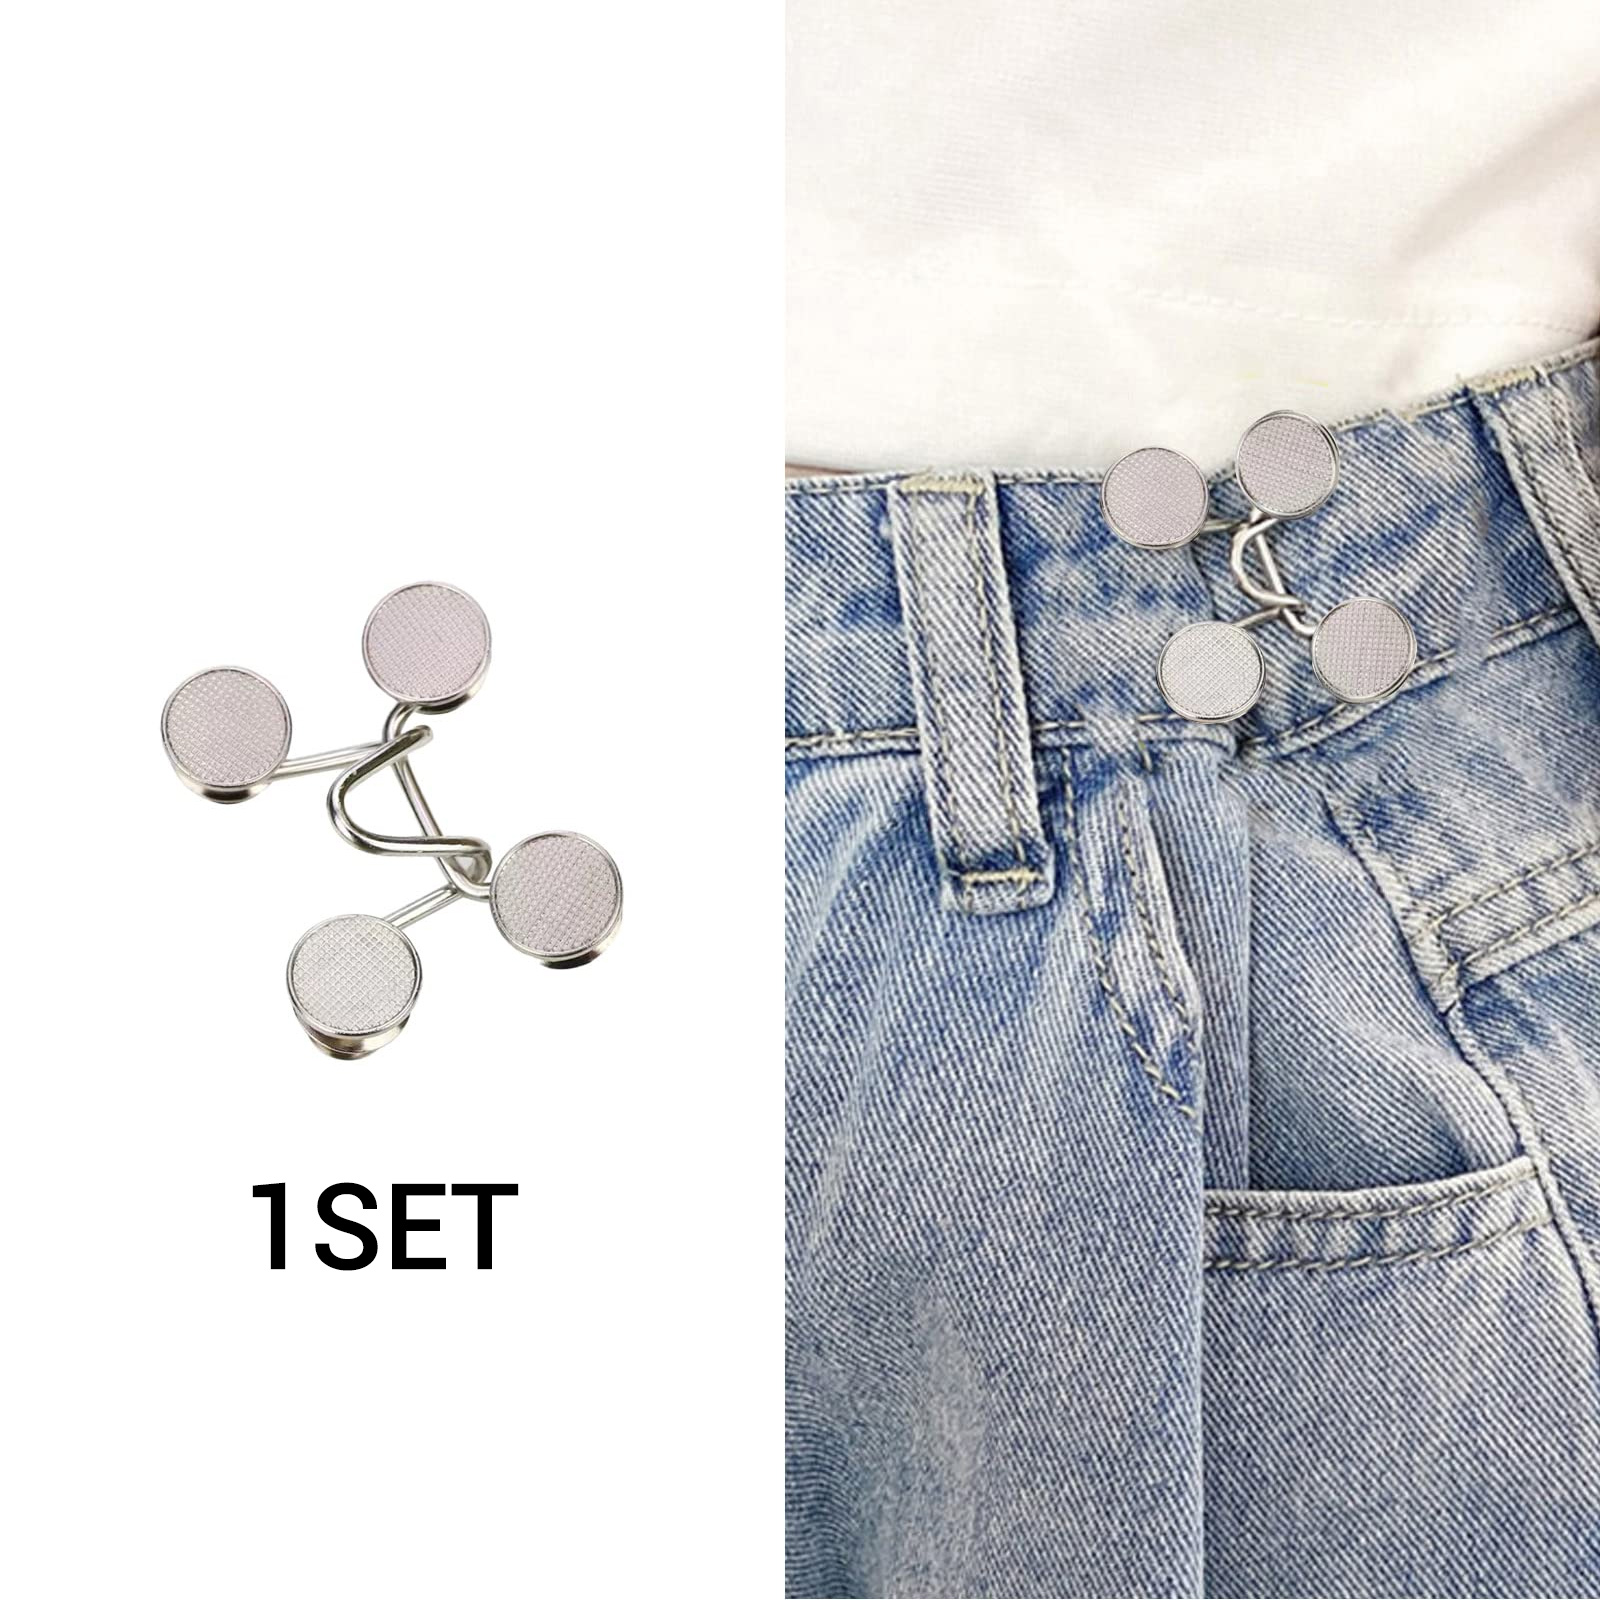 1 Set Jean Button Instant Jean Waist Tightener With Detachable Buttons For  Loose Jeans, No Sewing Required, Jean Accessory